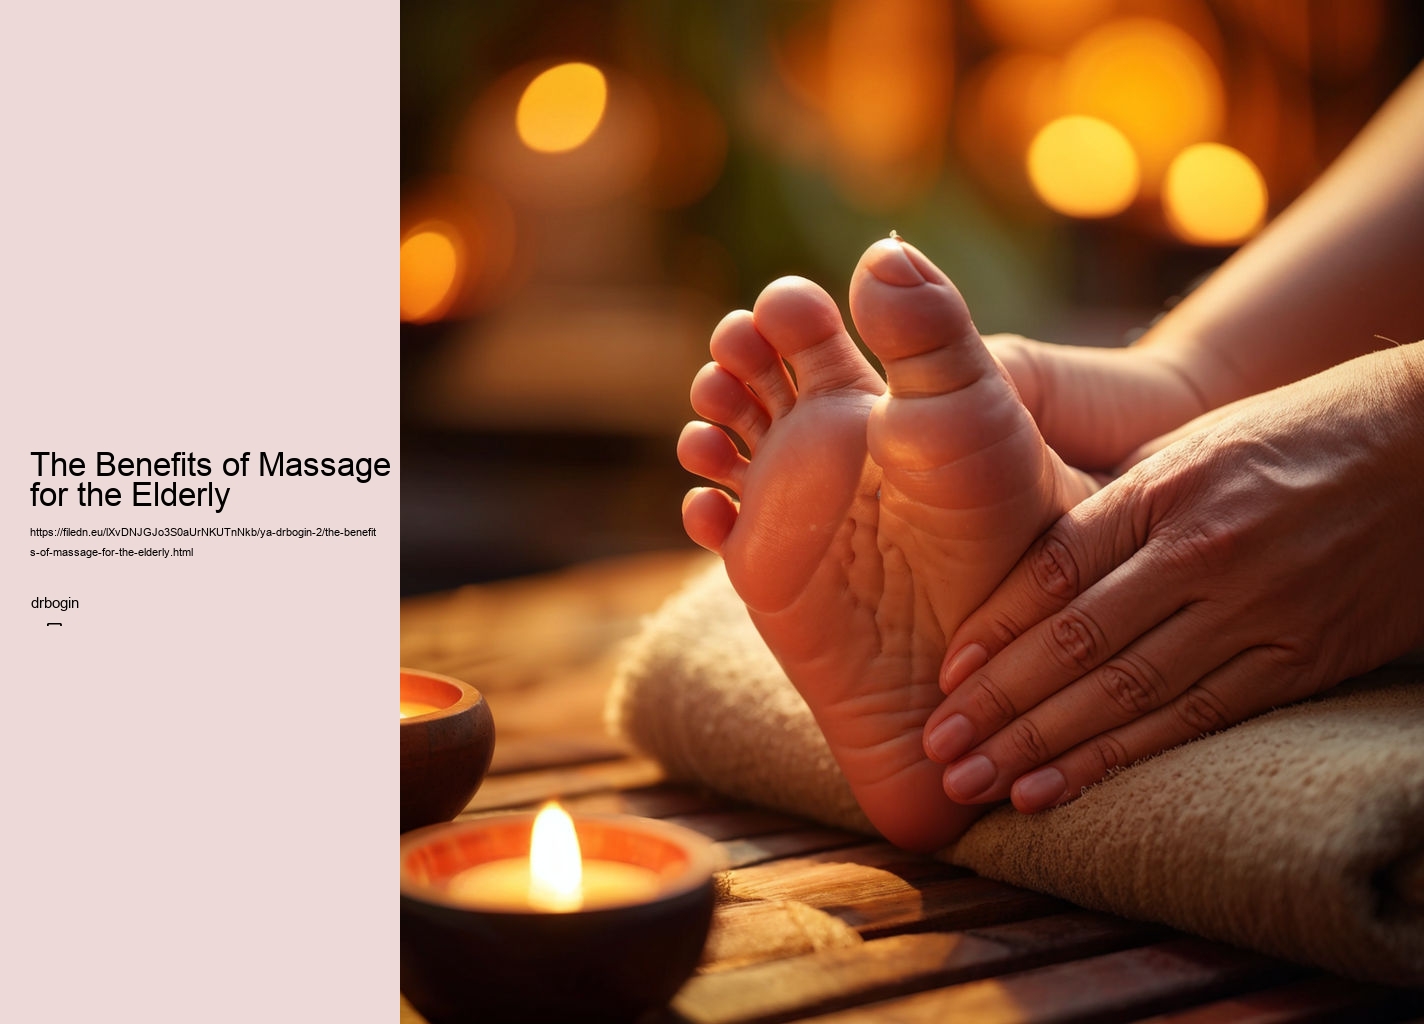 The Benefits of Massage for the Elderly